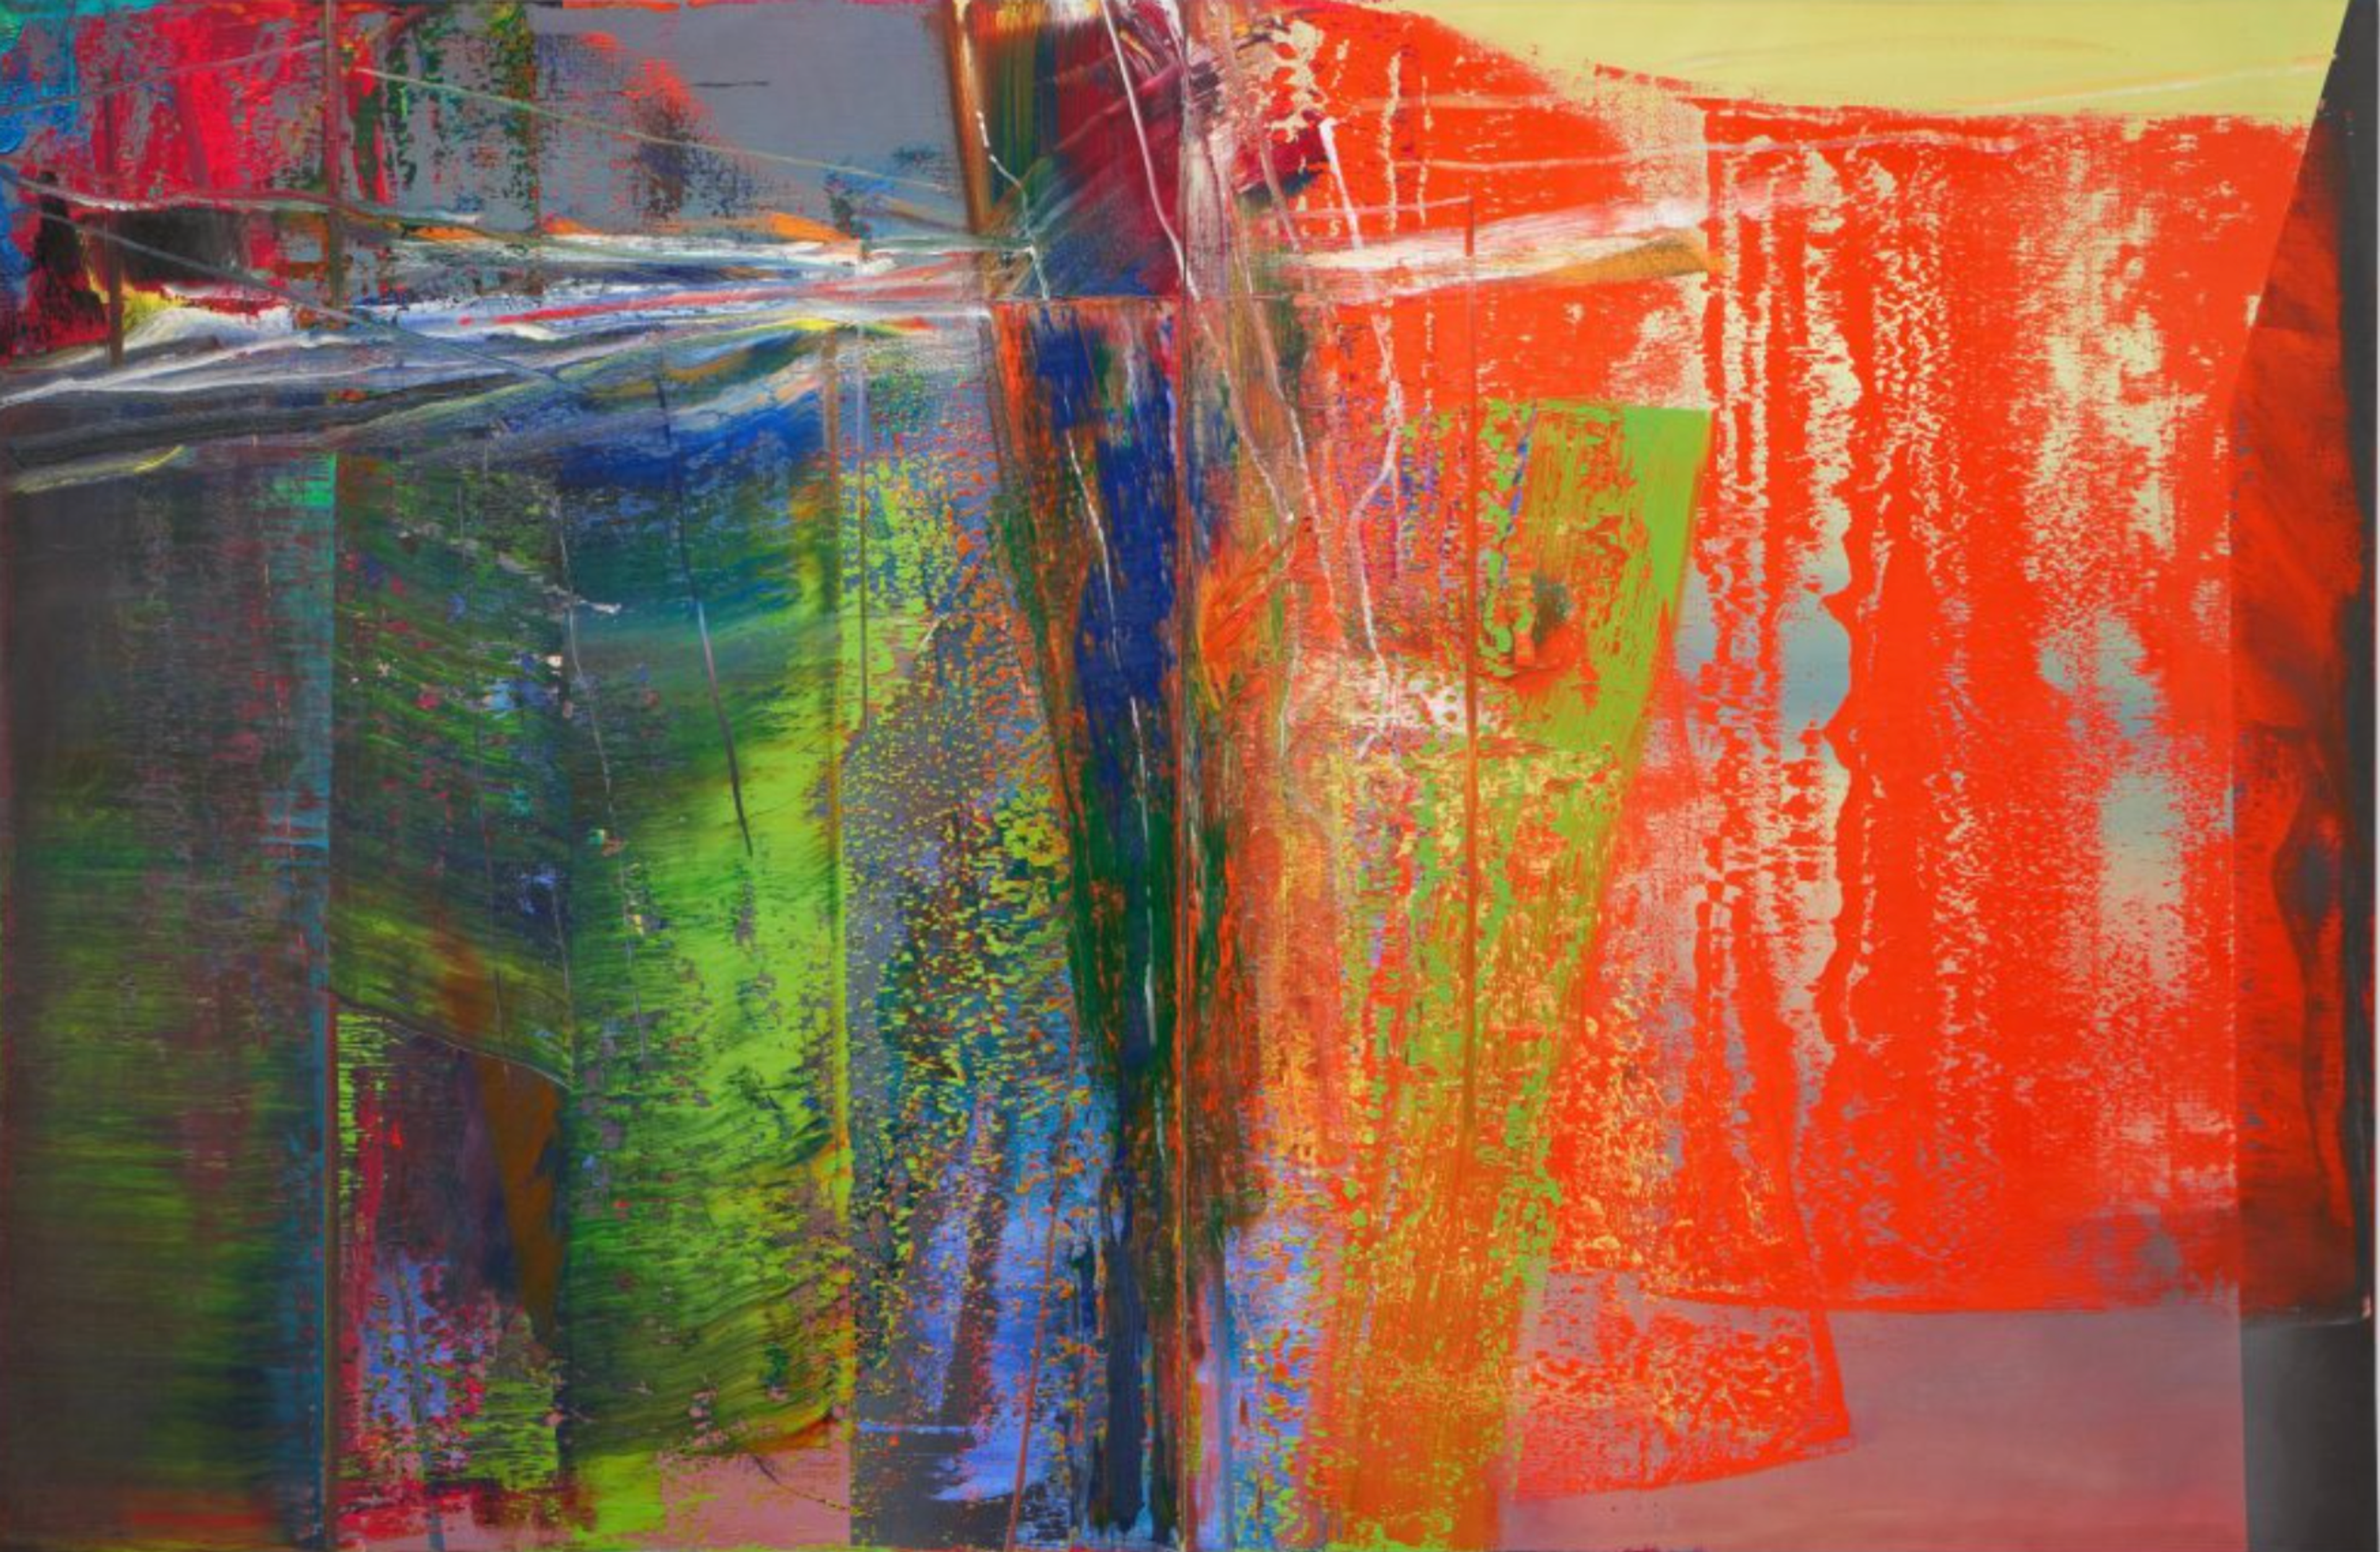 Abstract painting by Gerhard Richter, featuring abstract smears of red, green, blue pink and grey.